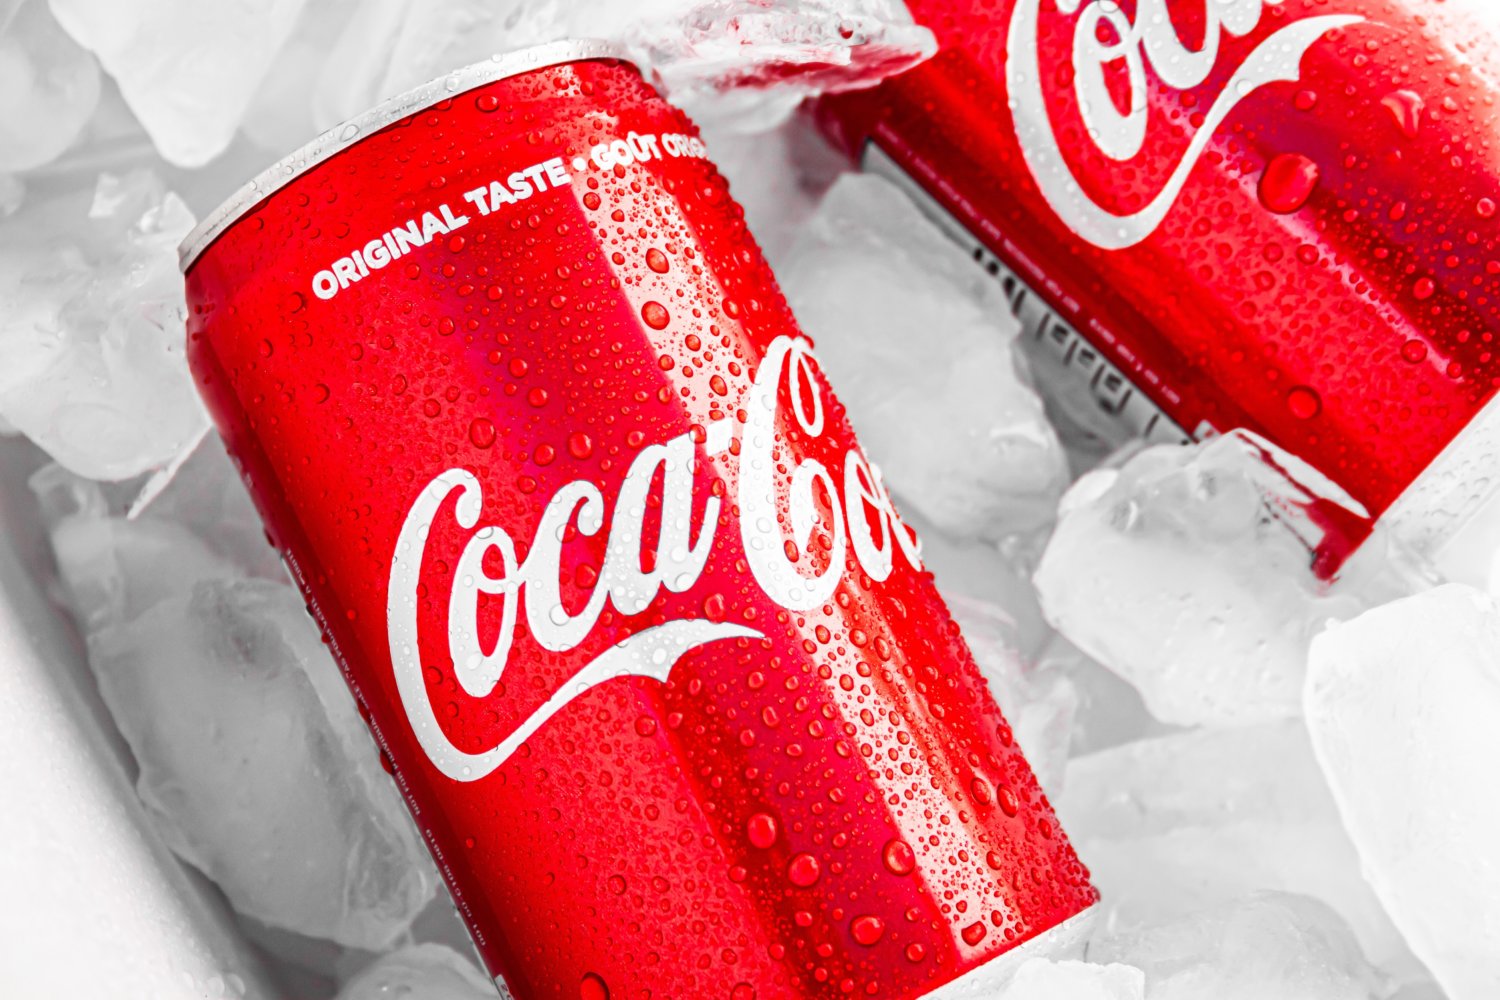 Coca Cola Cans on Ice